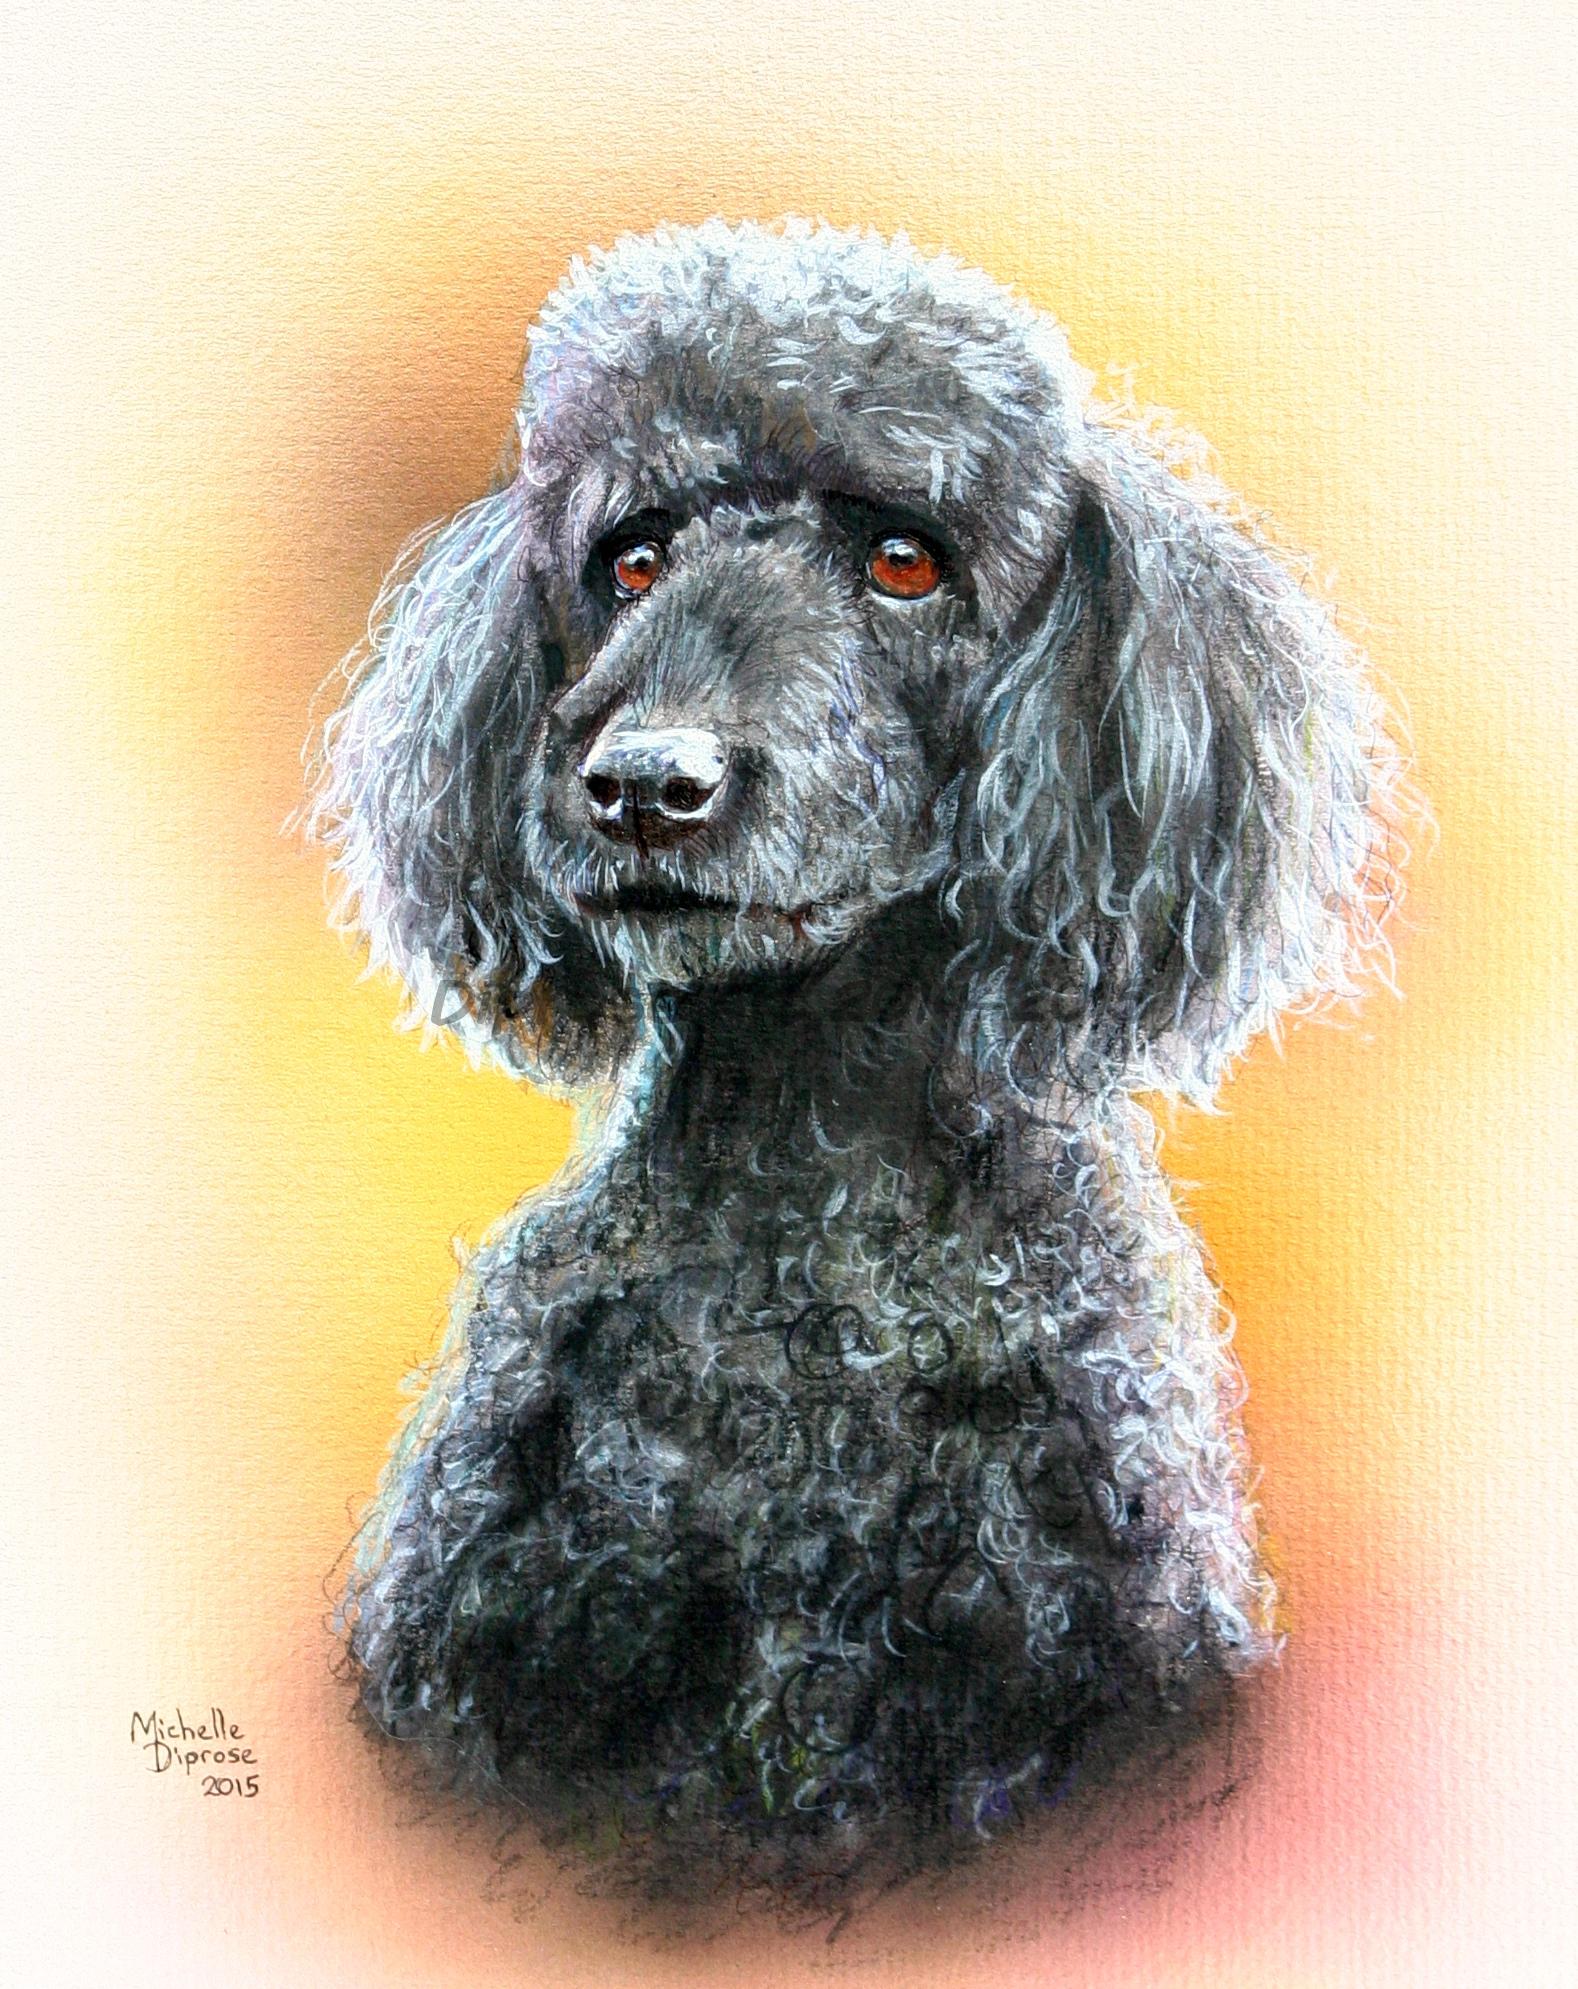 Acrylics on board - approx A4 - pet dog portrait - Zak is a standard poodle so he&#039;s a big boy and full of character - I think he has a very expressive face - he was avidly watching my chickens when I took the photos for reference for his portrait!